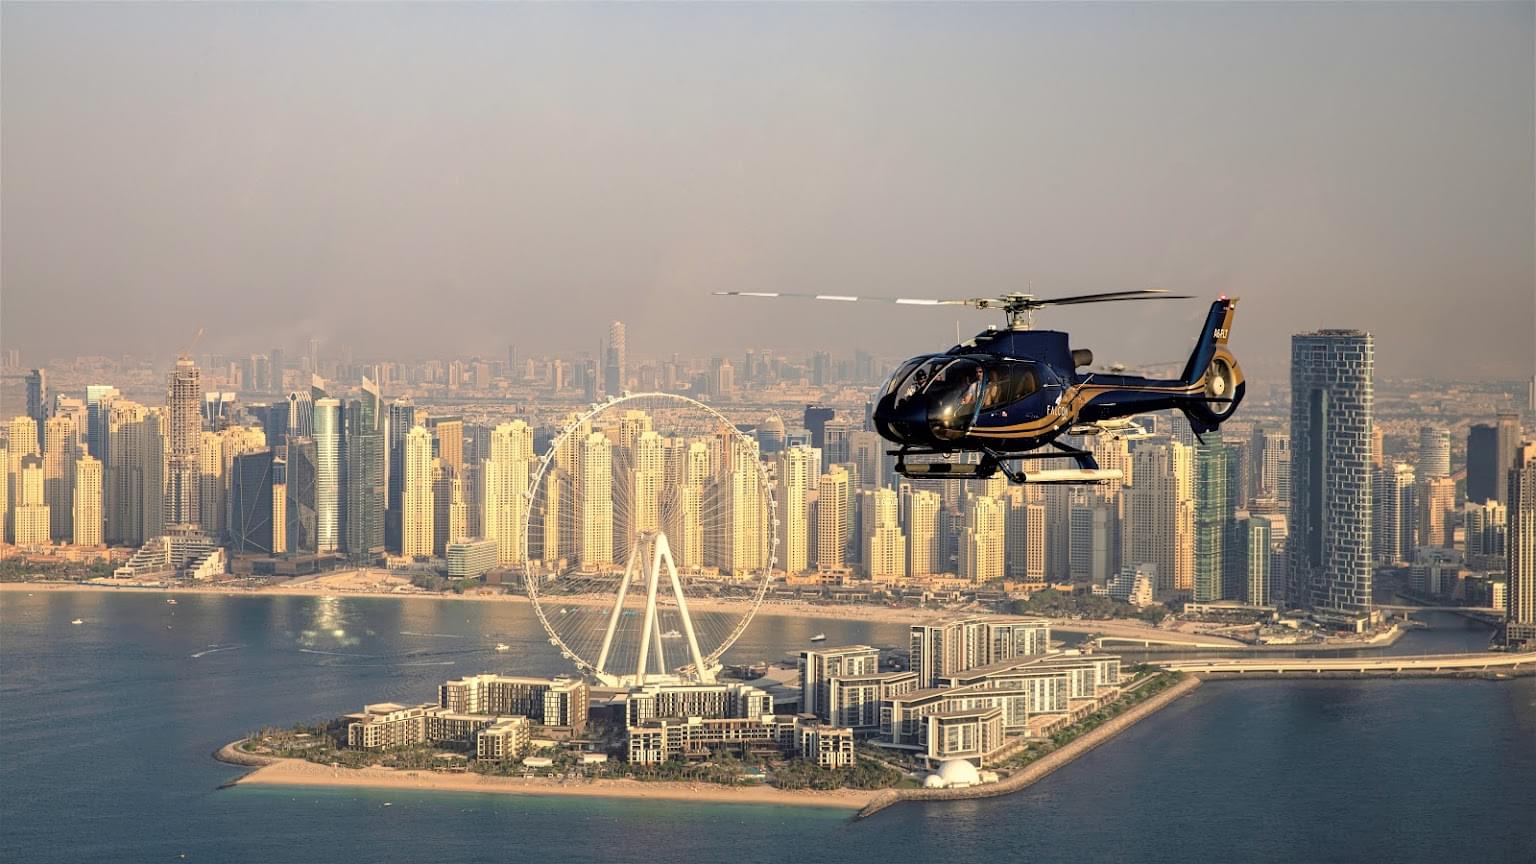 Click instagram worthy pictures as you soar above the famous Dubai landmarks on your helicopter ride